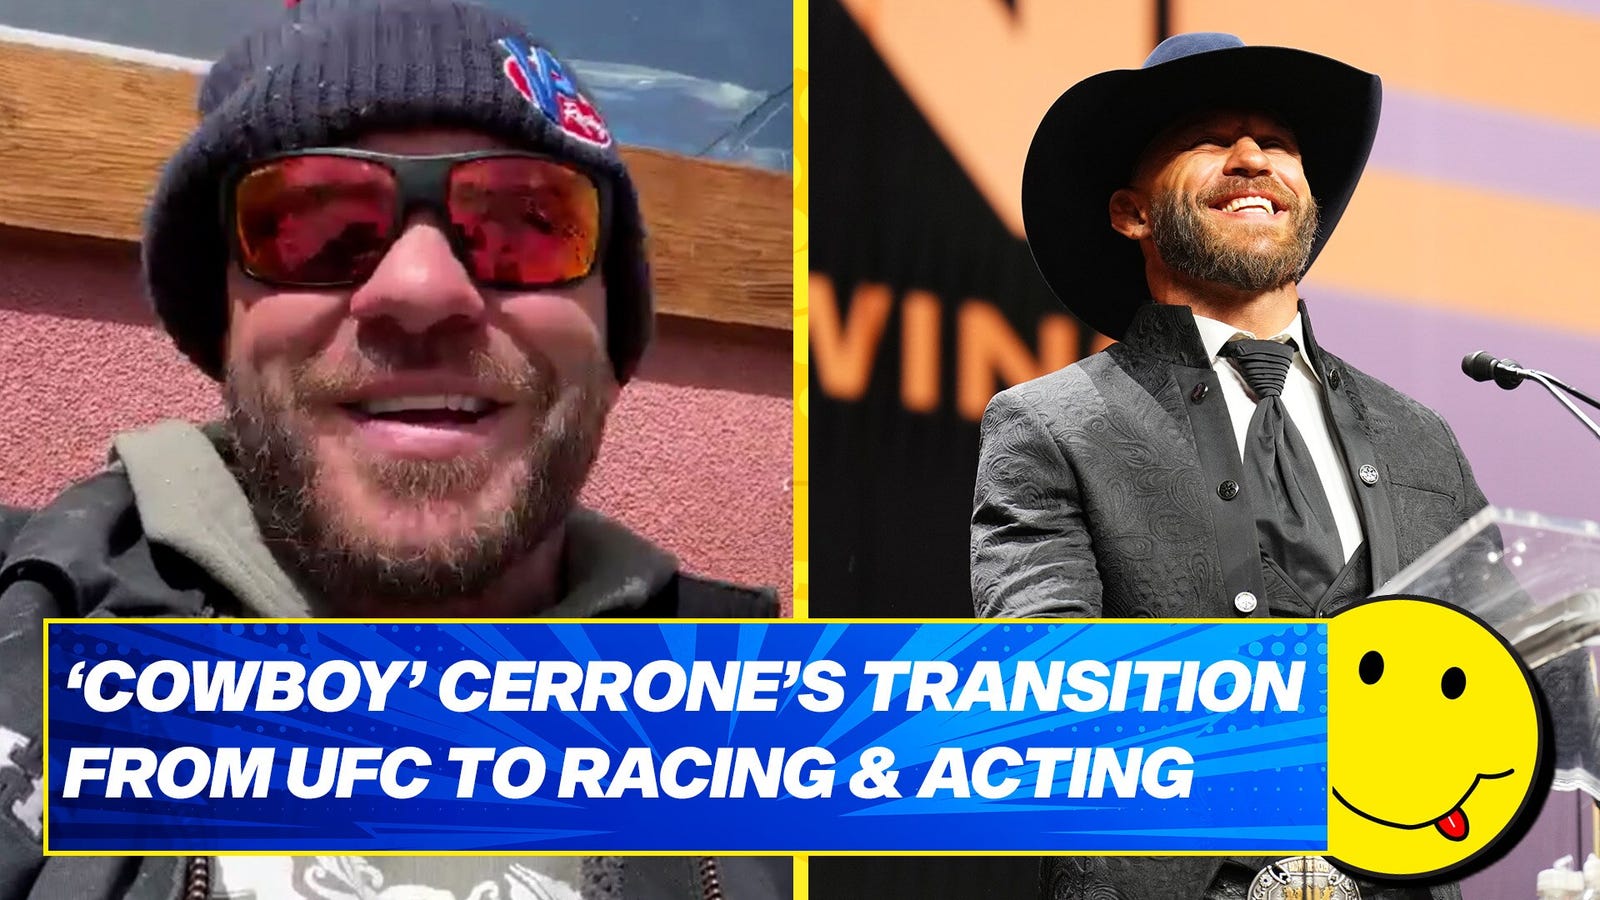 Donald ‘Cowboy’ Cerrone on his transition from UFC to racing and acting